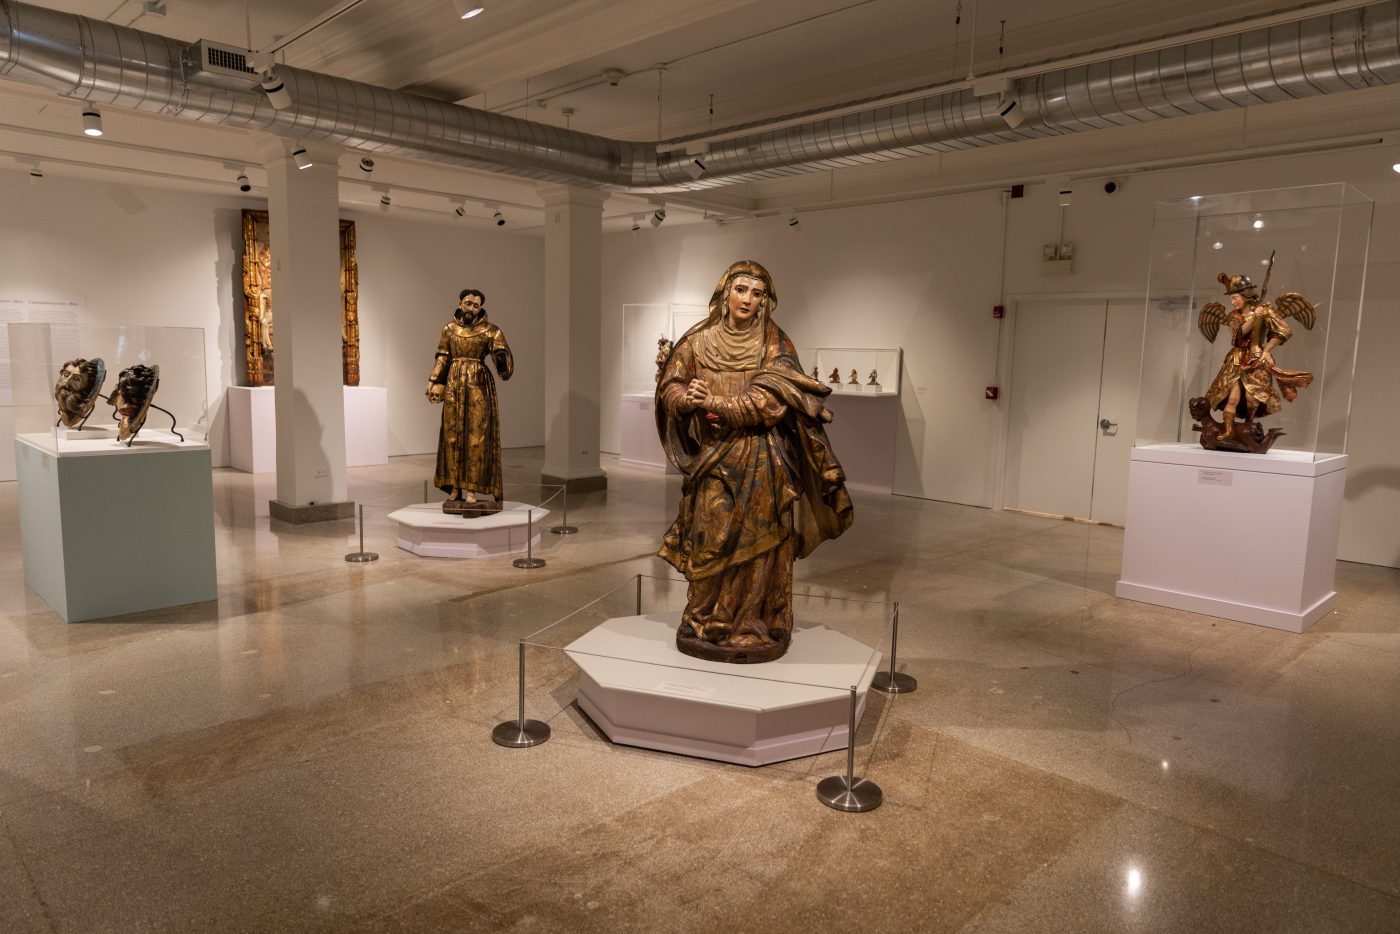 Statue carved by an unknown, possibly Mexican, artist titled "Mater Dolorosa"